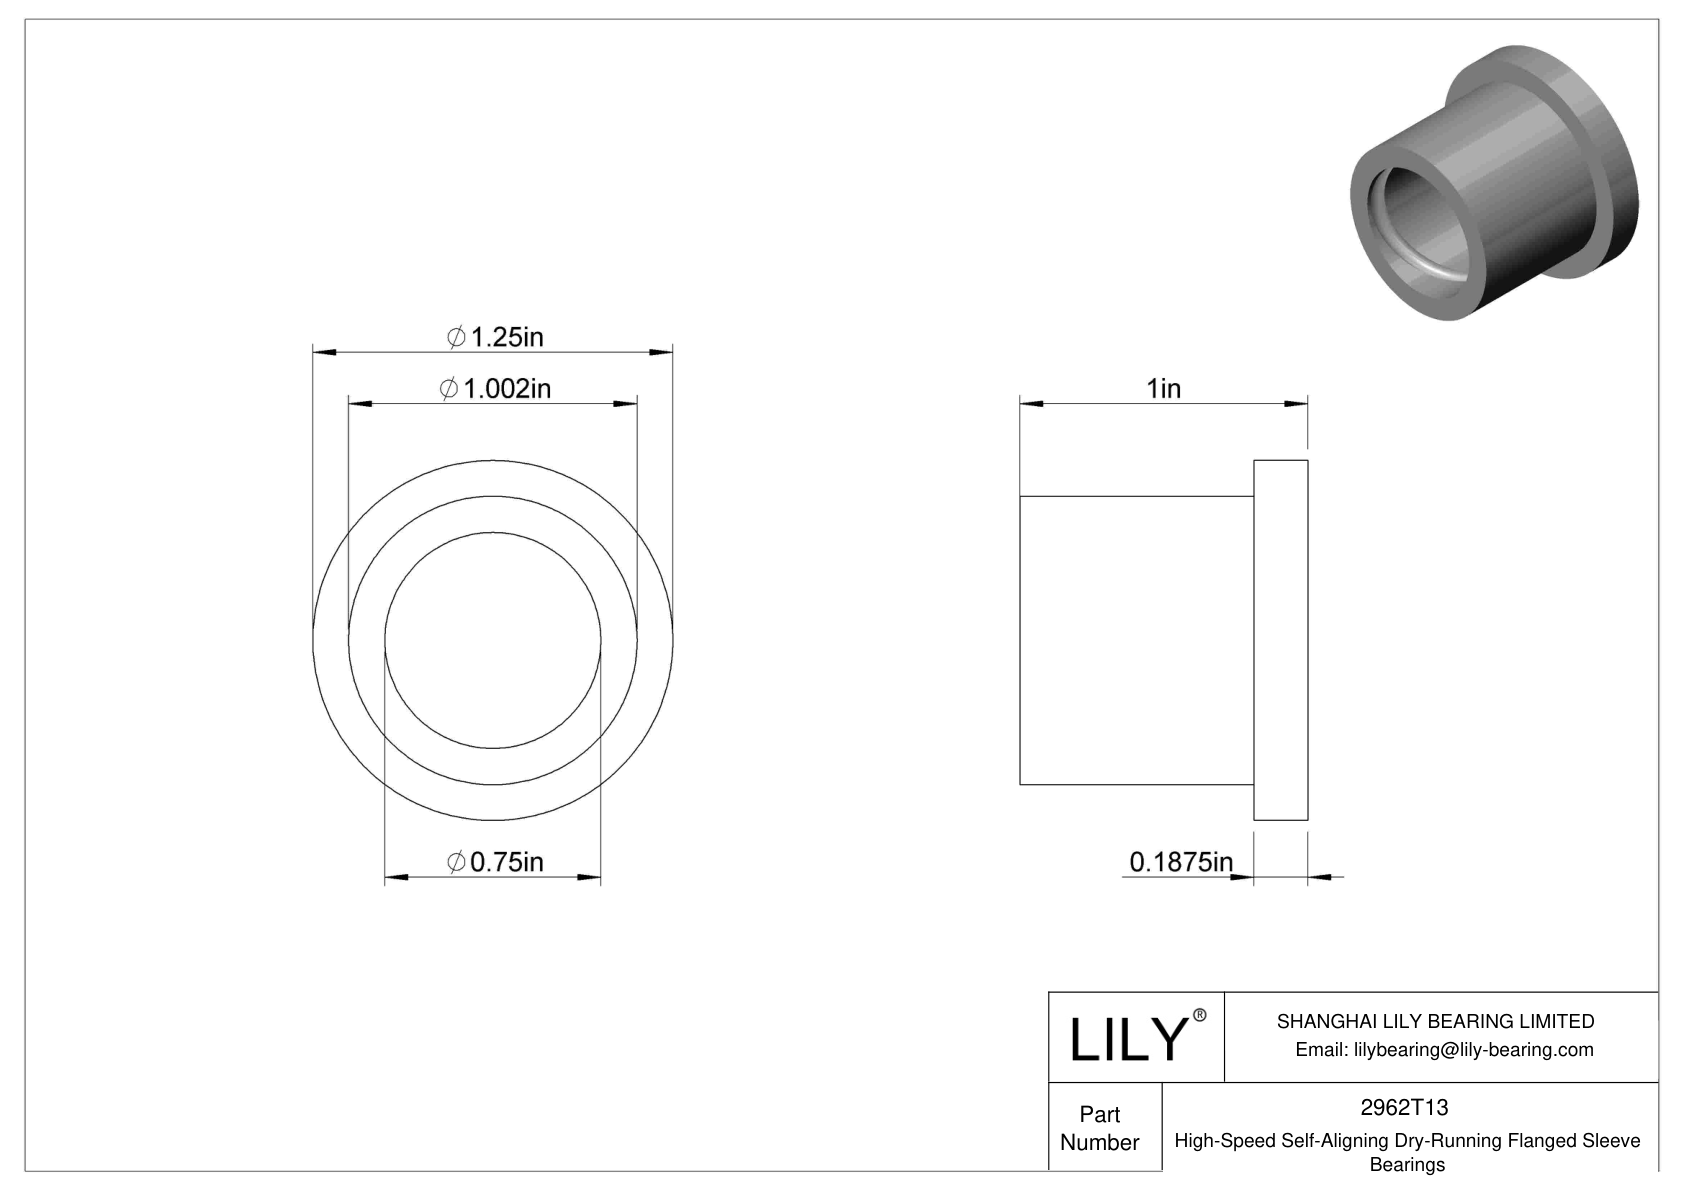 CJGCTBD High-Temperature Dry-Running Flanged Sleeve Bearings cad drawing